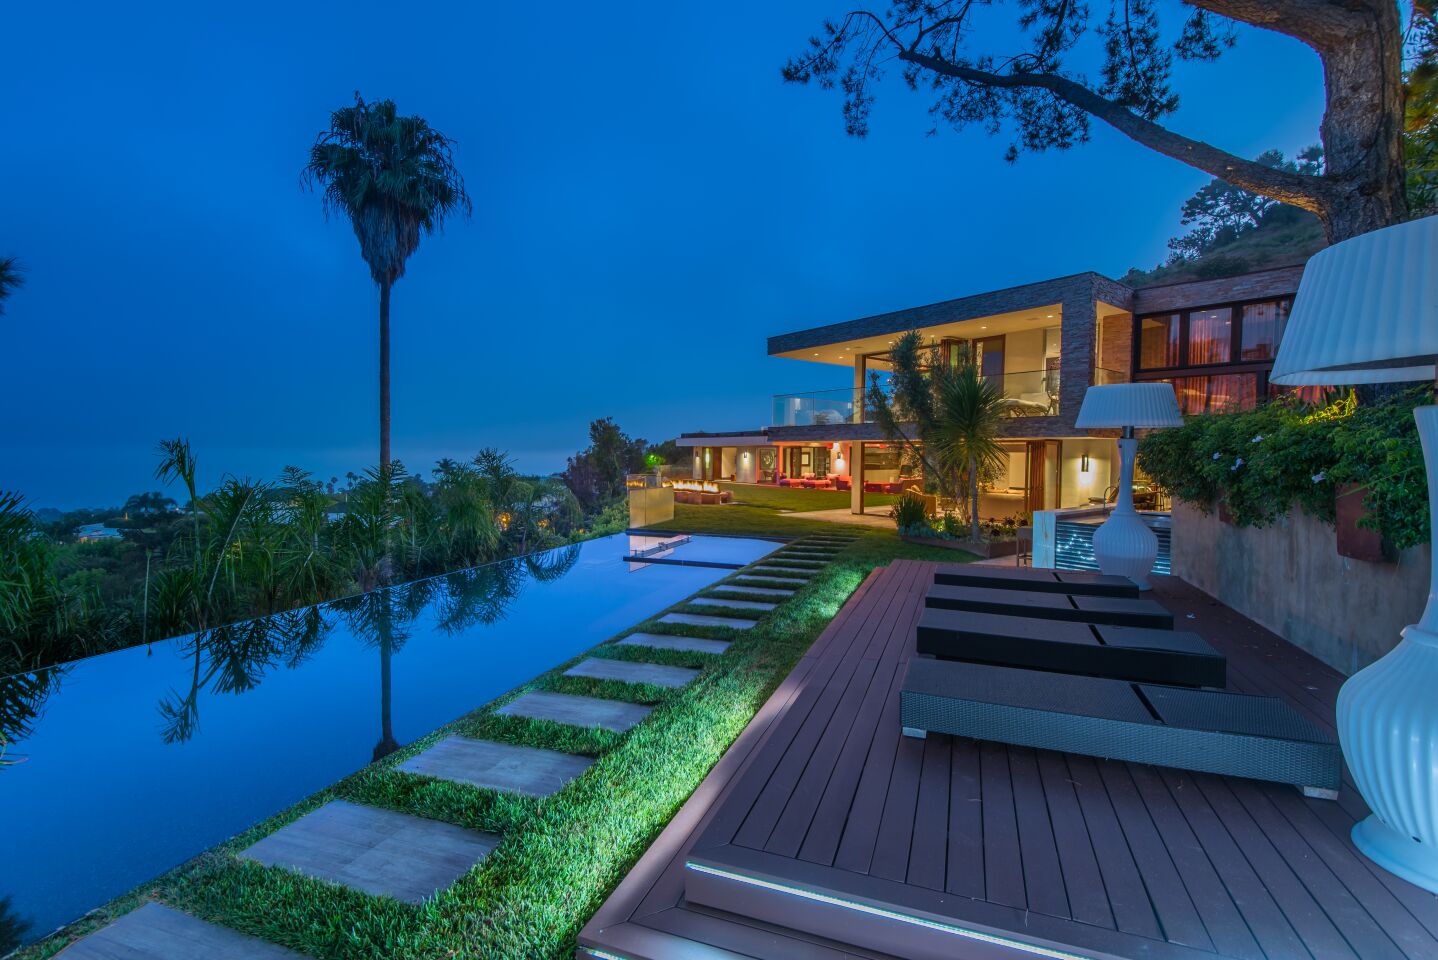 Reggie Bush's contemporary home in Pacific Palisades | Hot Property